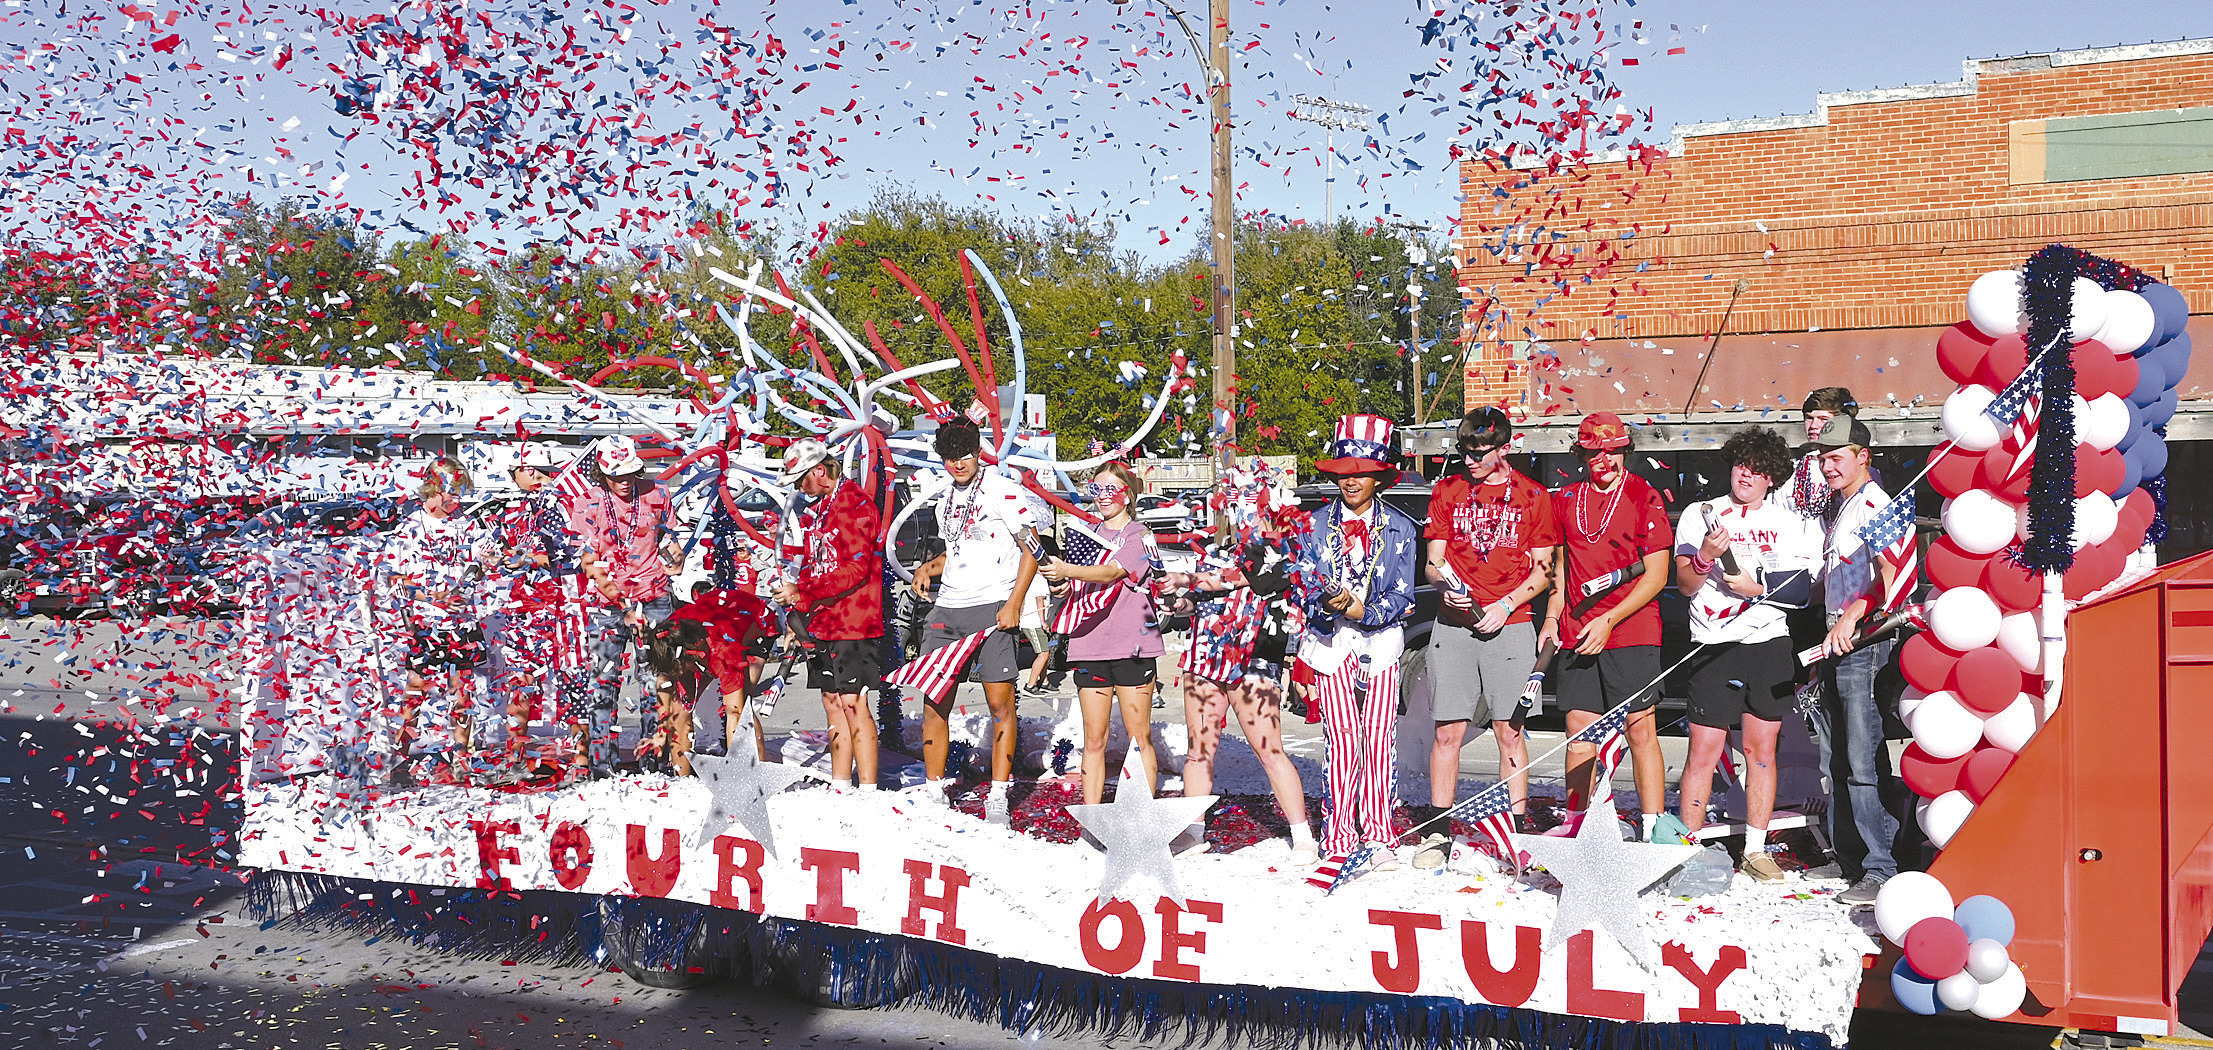 Blue ribbon winner. The sophomore class float depicting the Fourth of July passes by the judges stand with a big shower of red, white, and blue confetti. The class won tops in the float competition, which featured “Holidays.” The 2023 homecoming parade rolled down Main Street through the down town area on Friday afternoon. Donnie Lucas /AlbanyNews